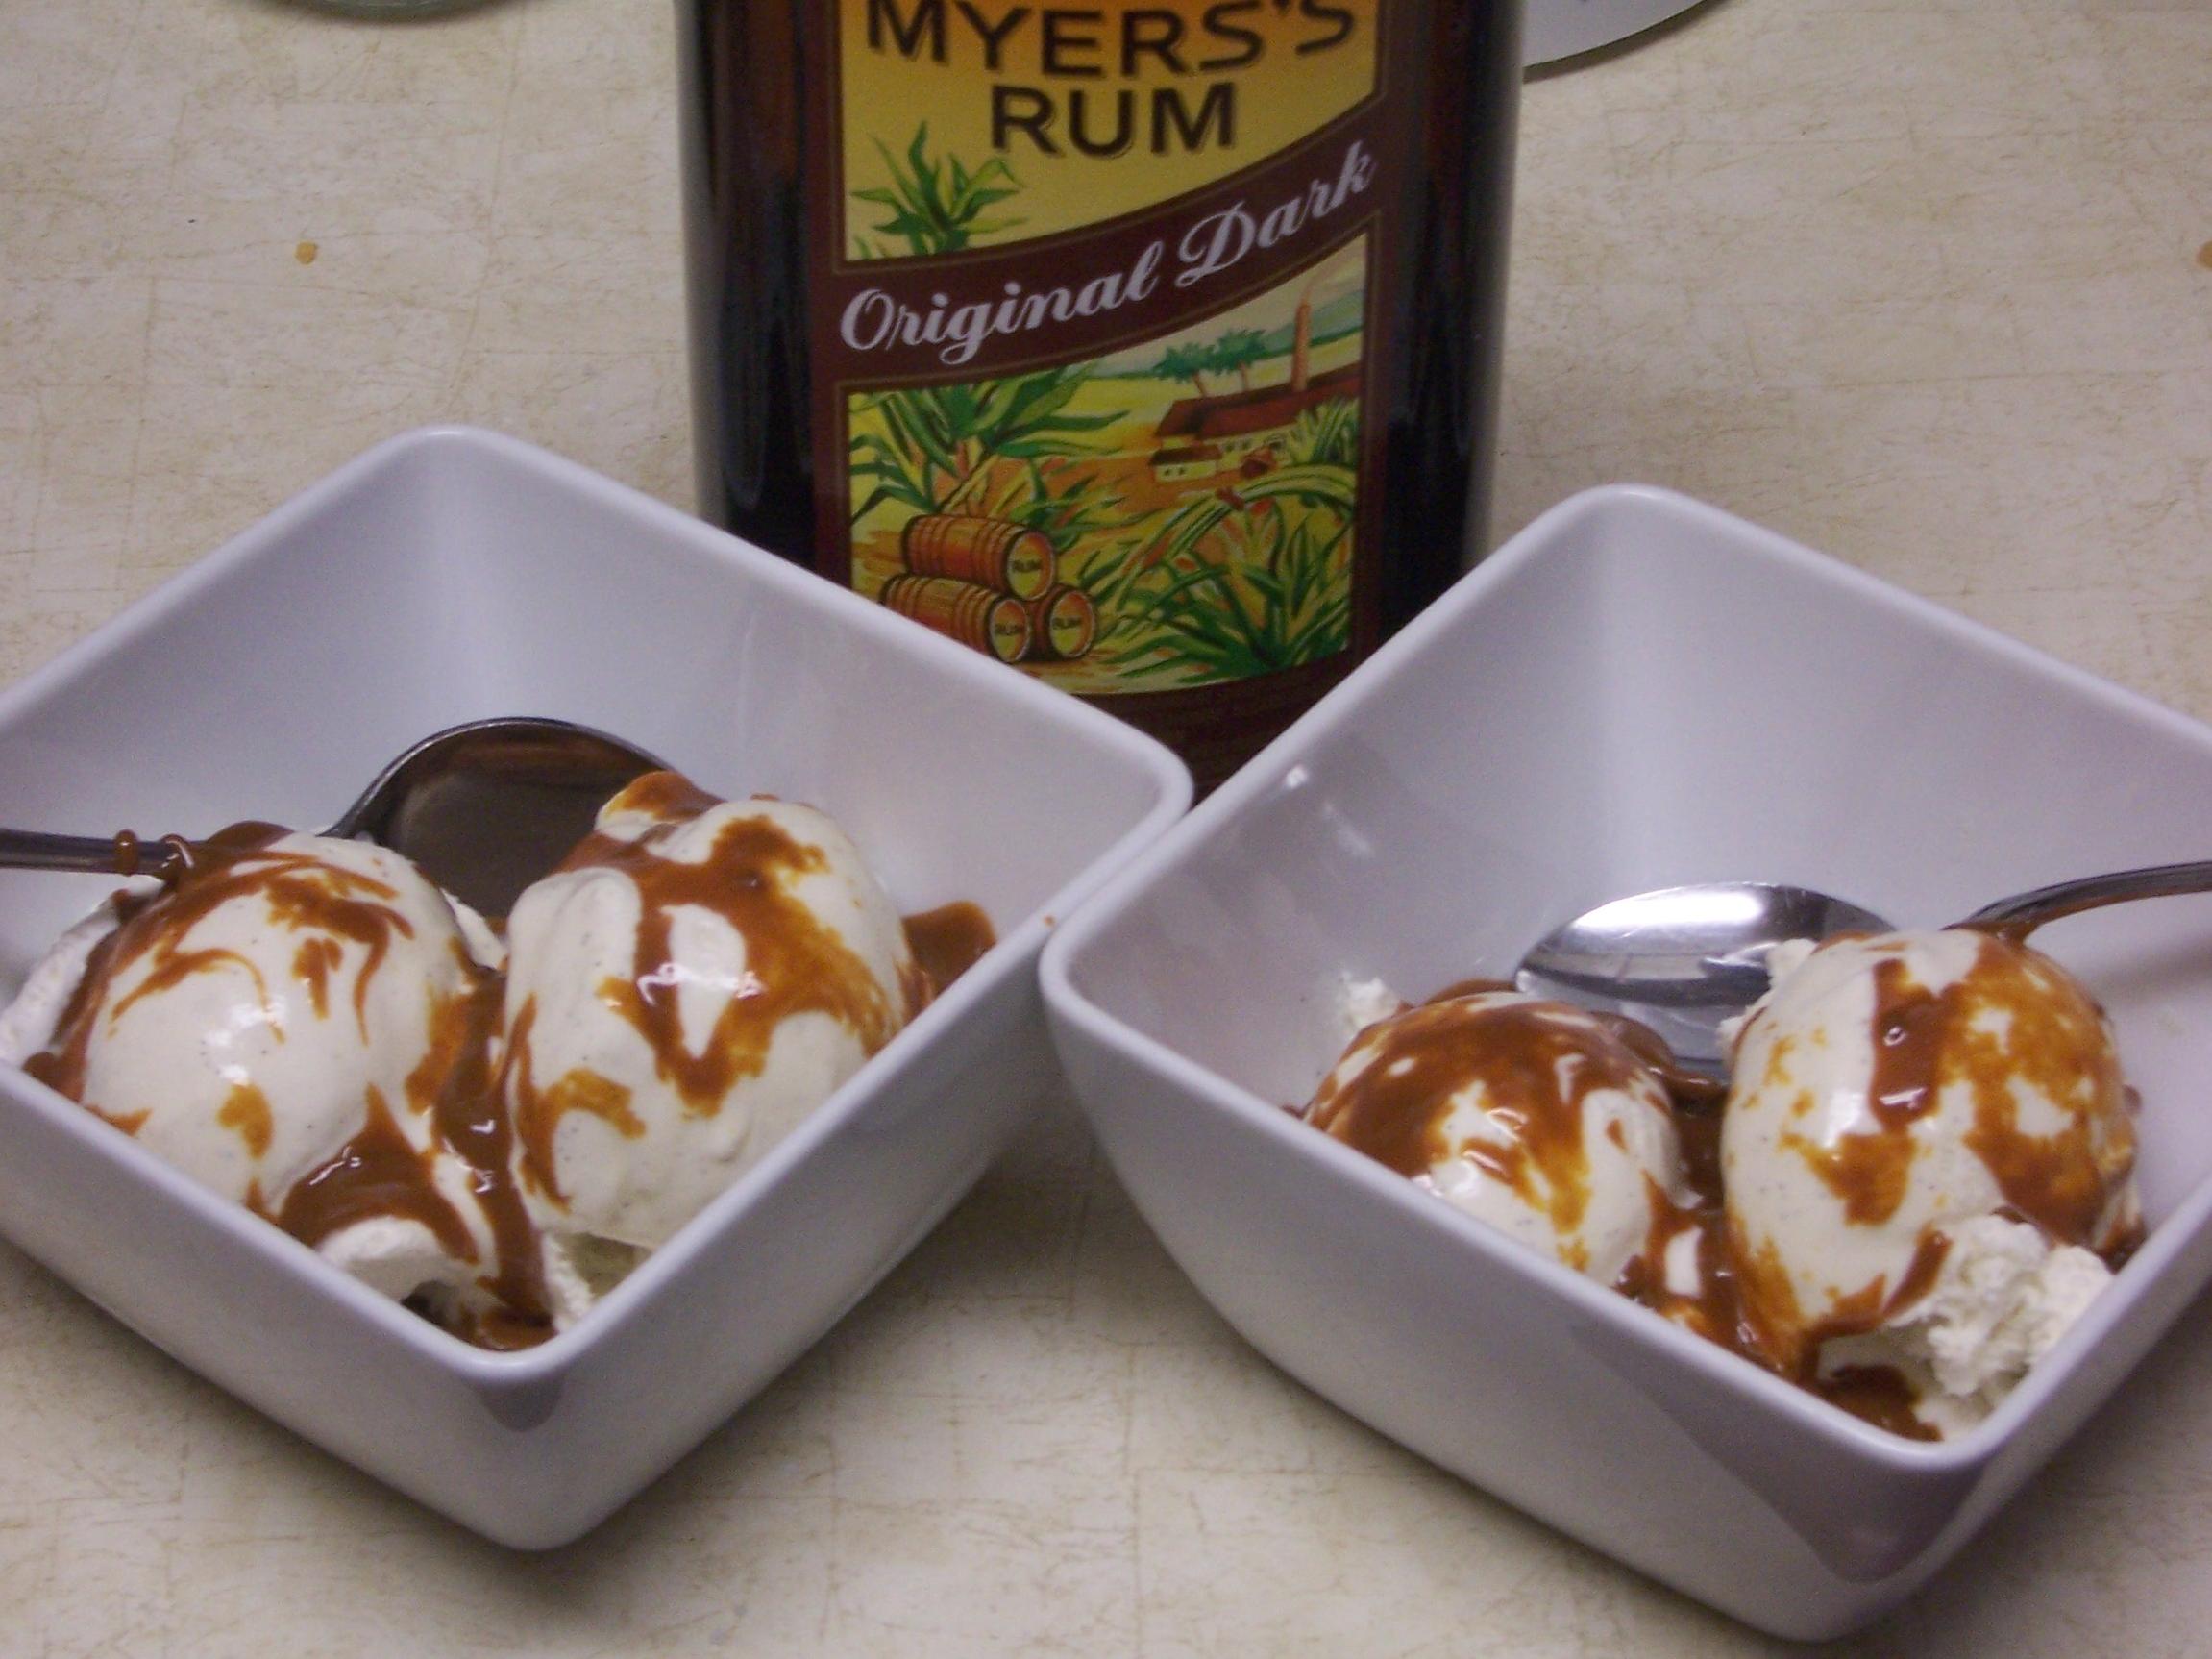  The sweet aroma of caramelized sugar and rum is irresistible!